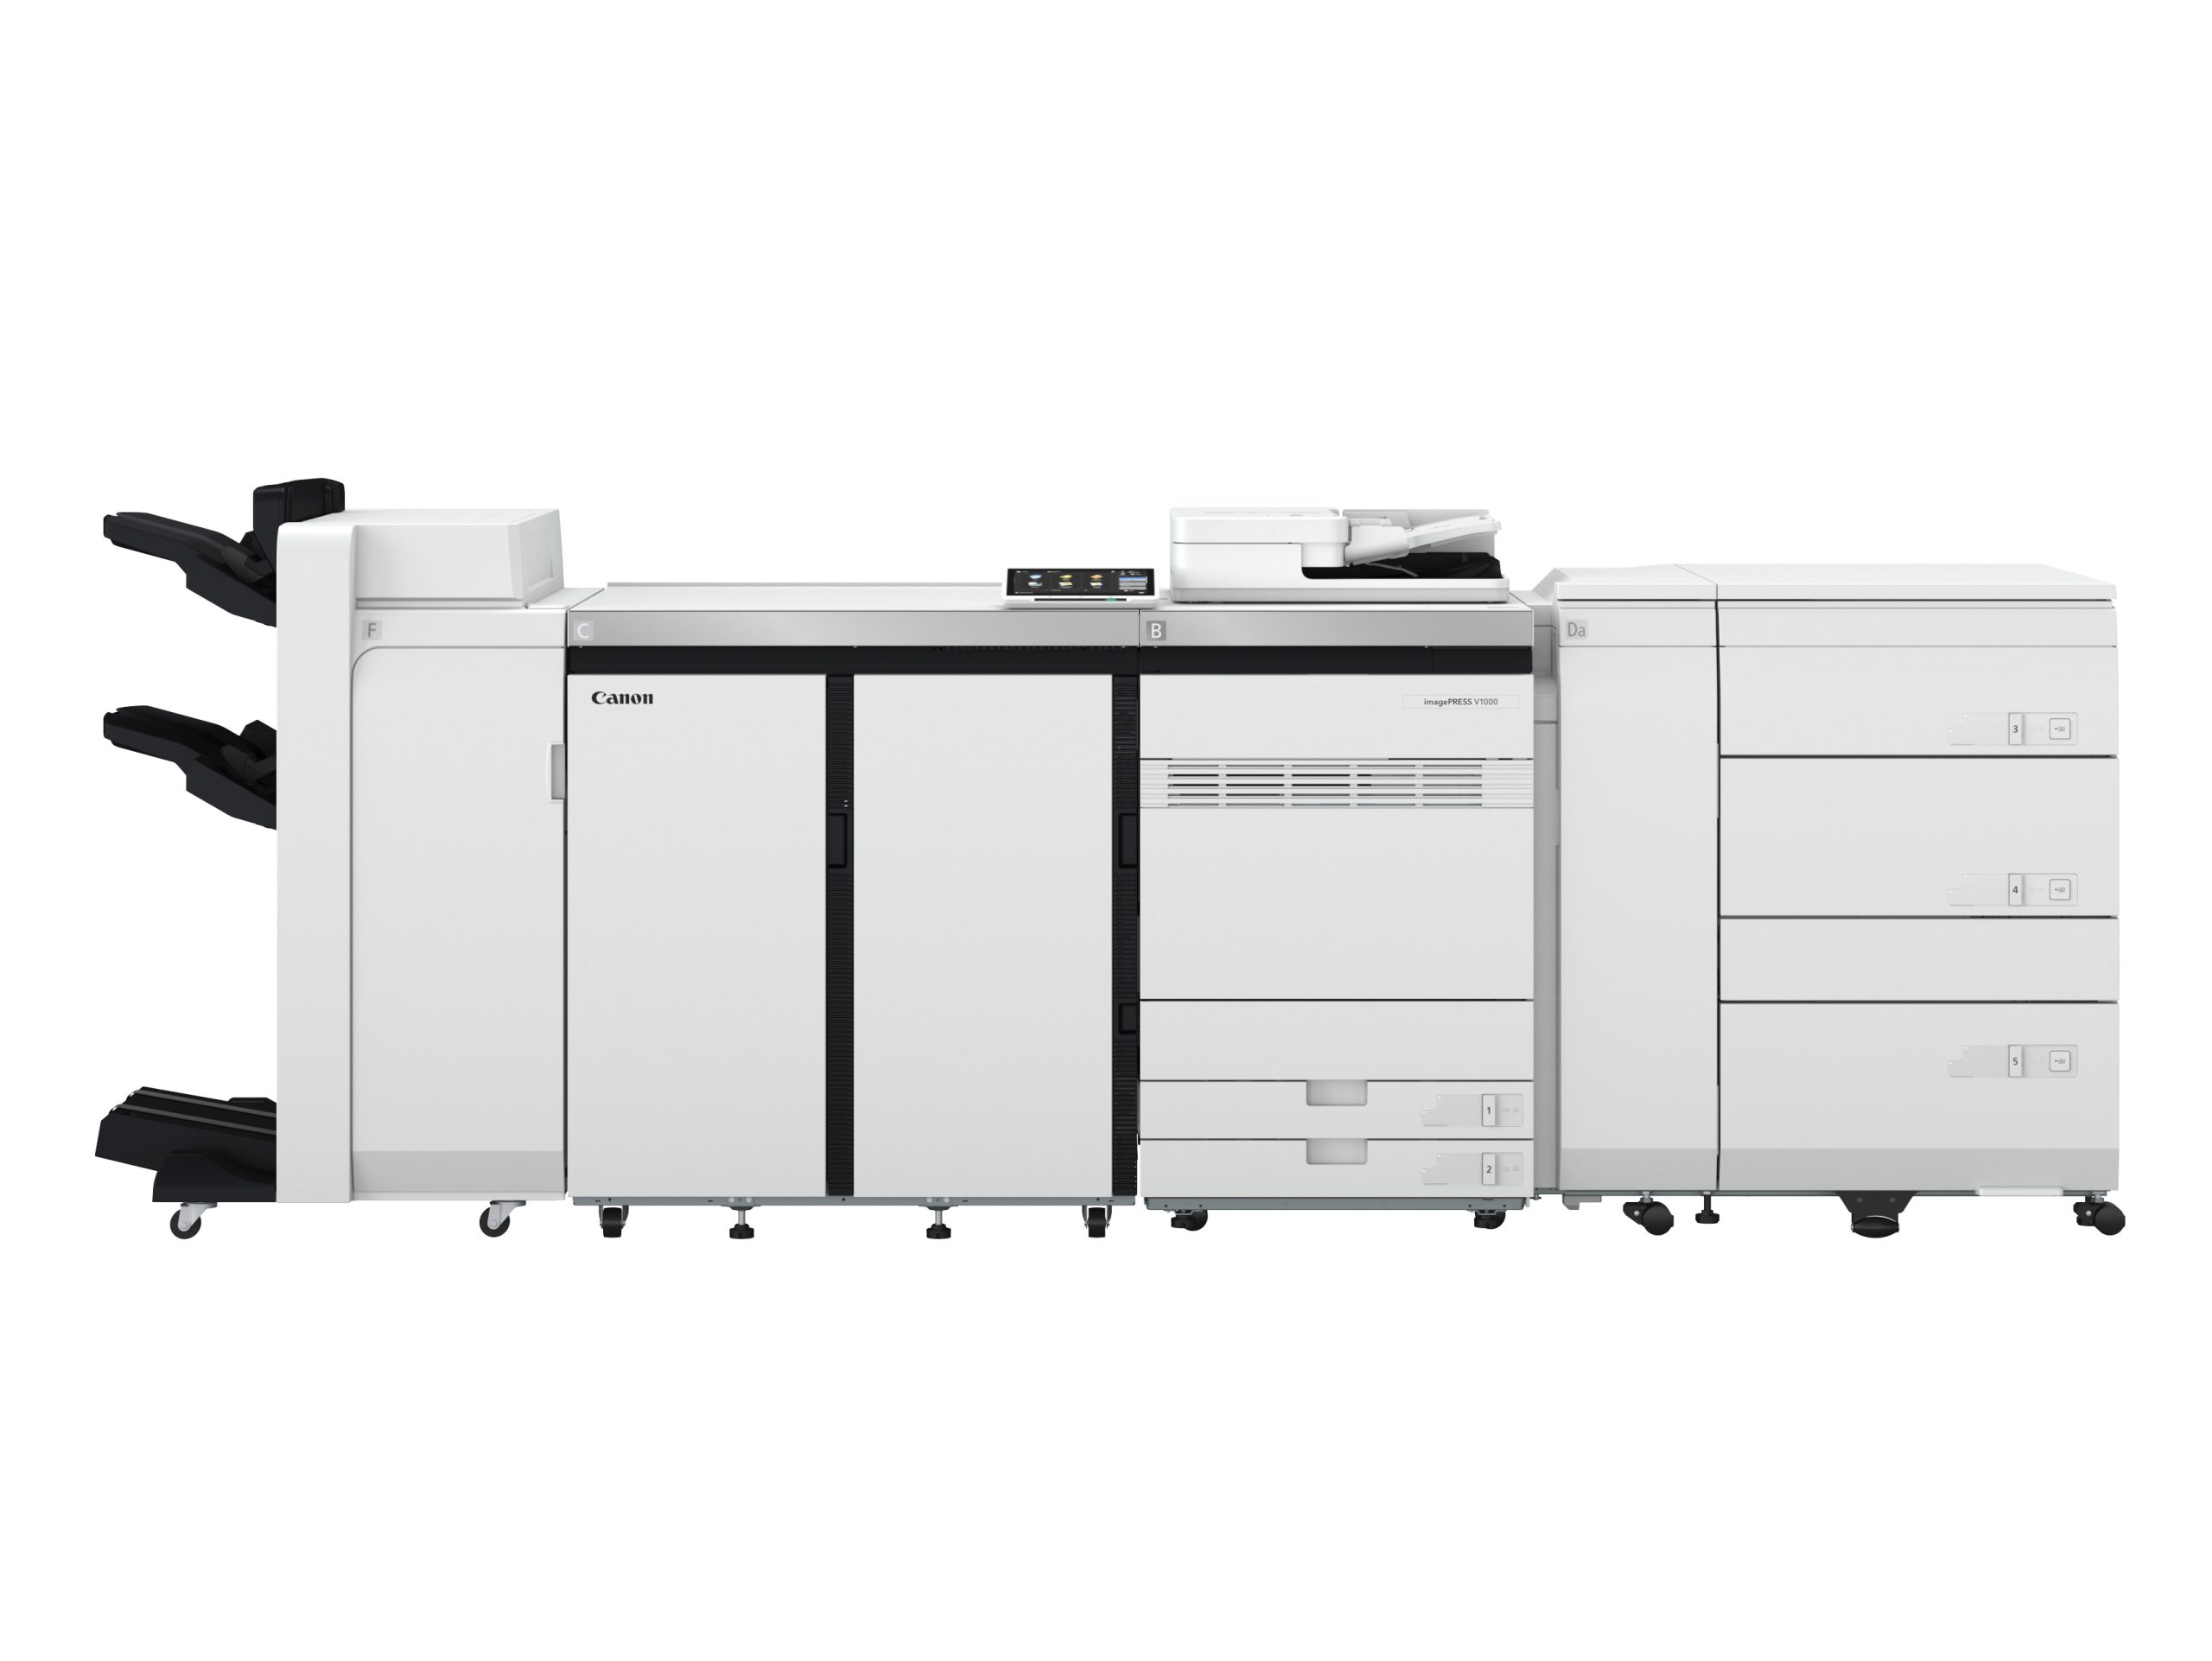 Canon imagePRESS V1000 Production Printer Now Available in PH